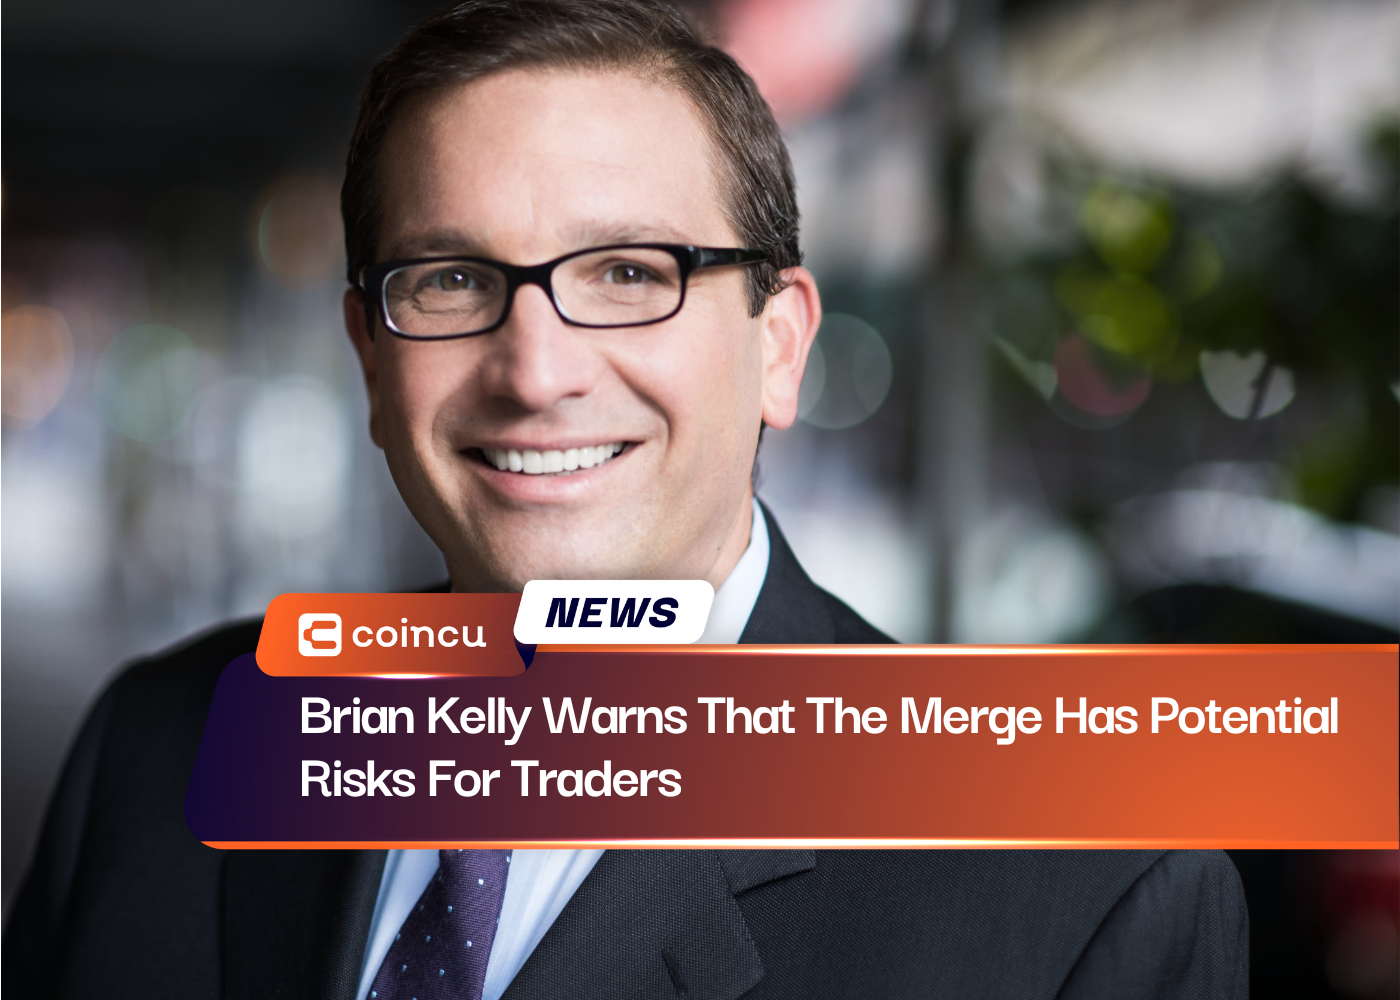 Brian Kelly Warns That The Merge Has Potential Risks For Traders